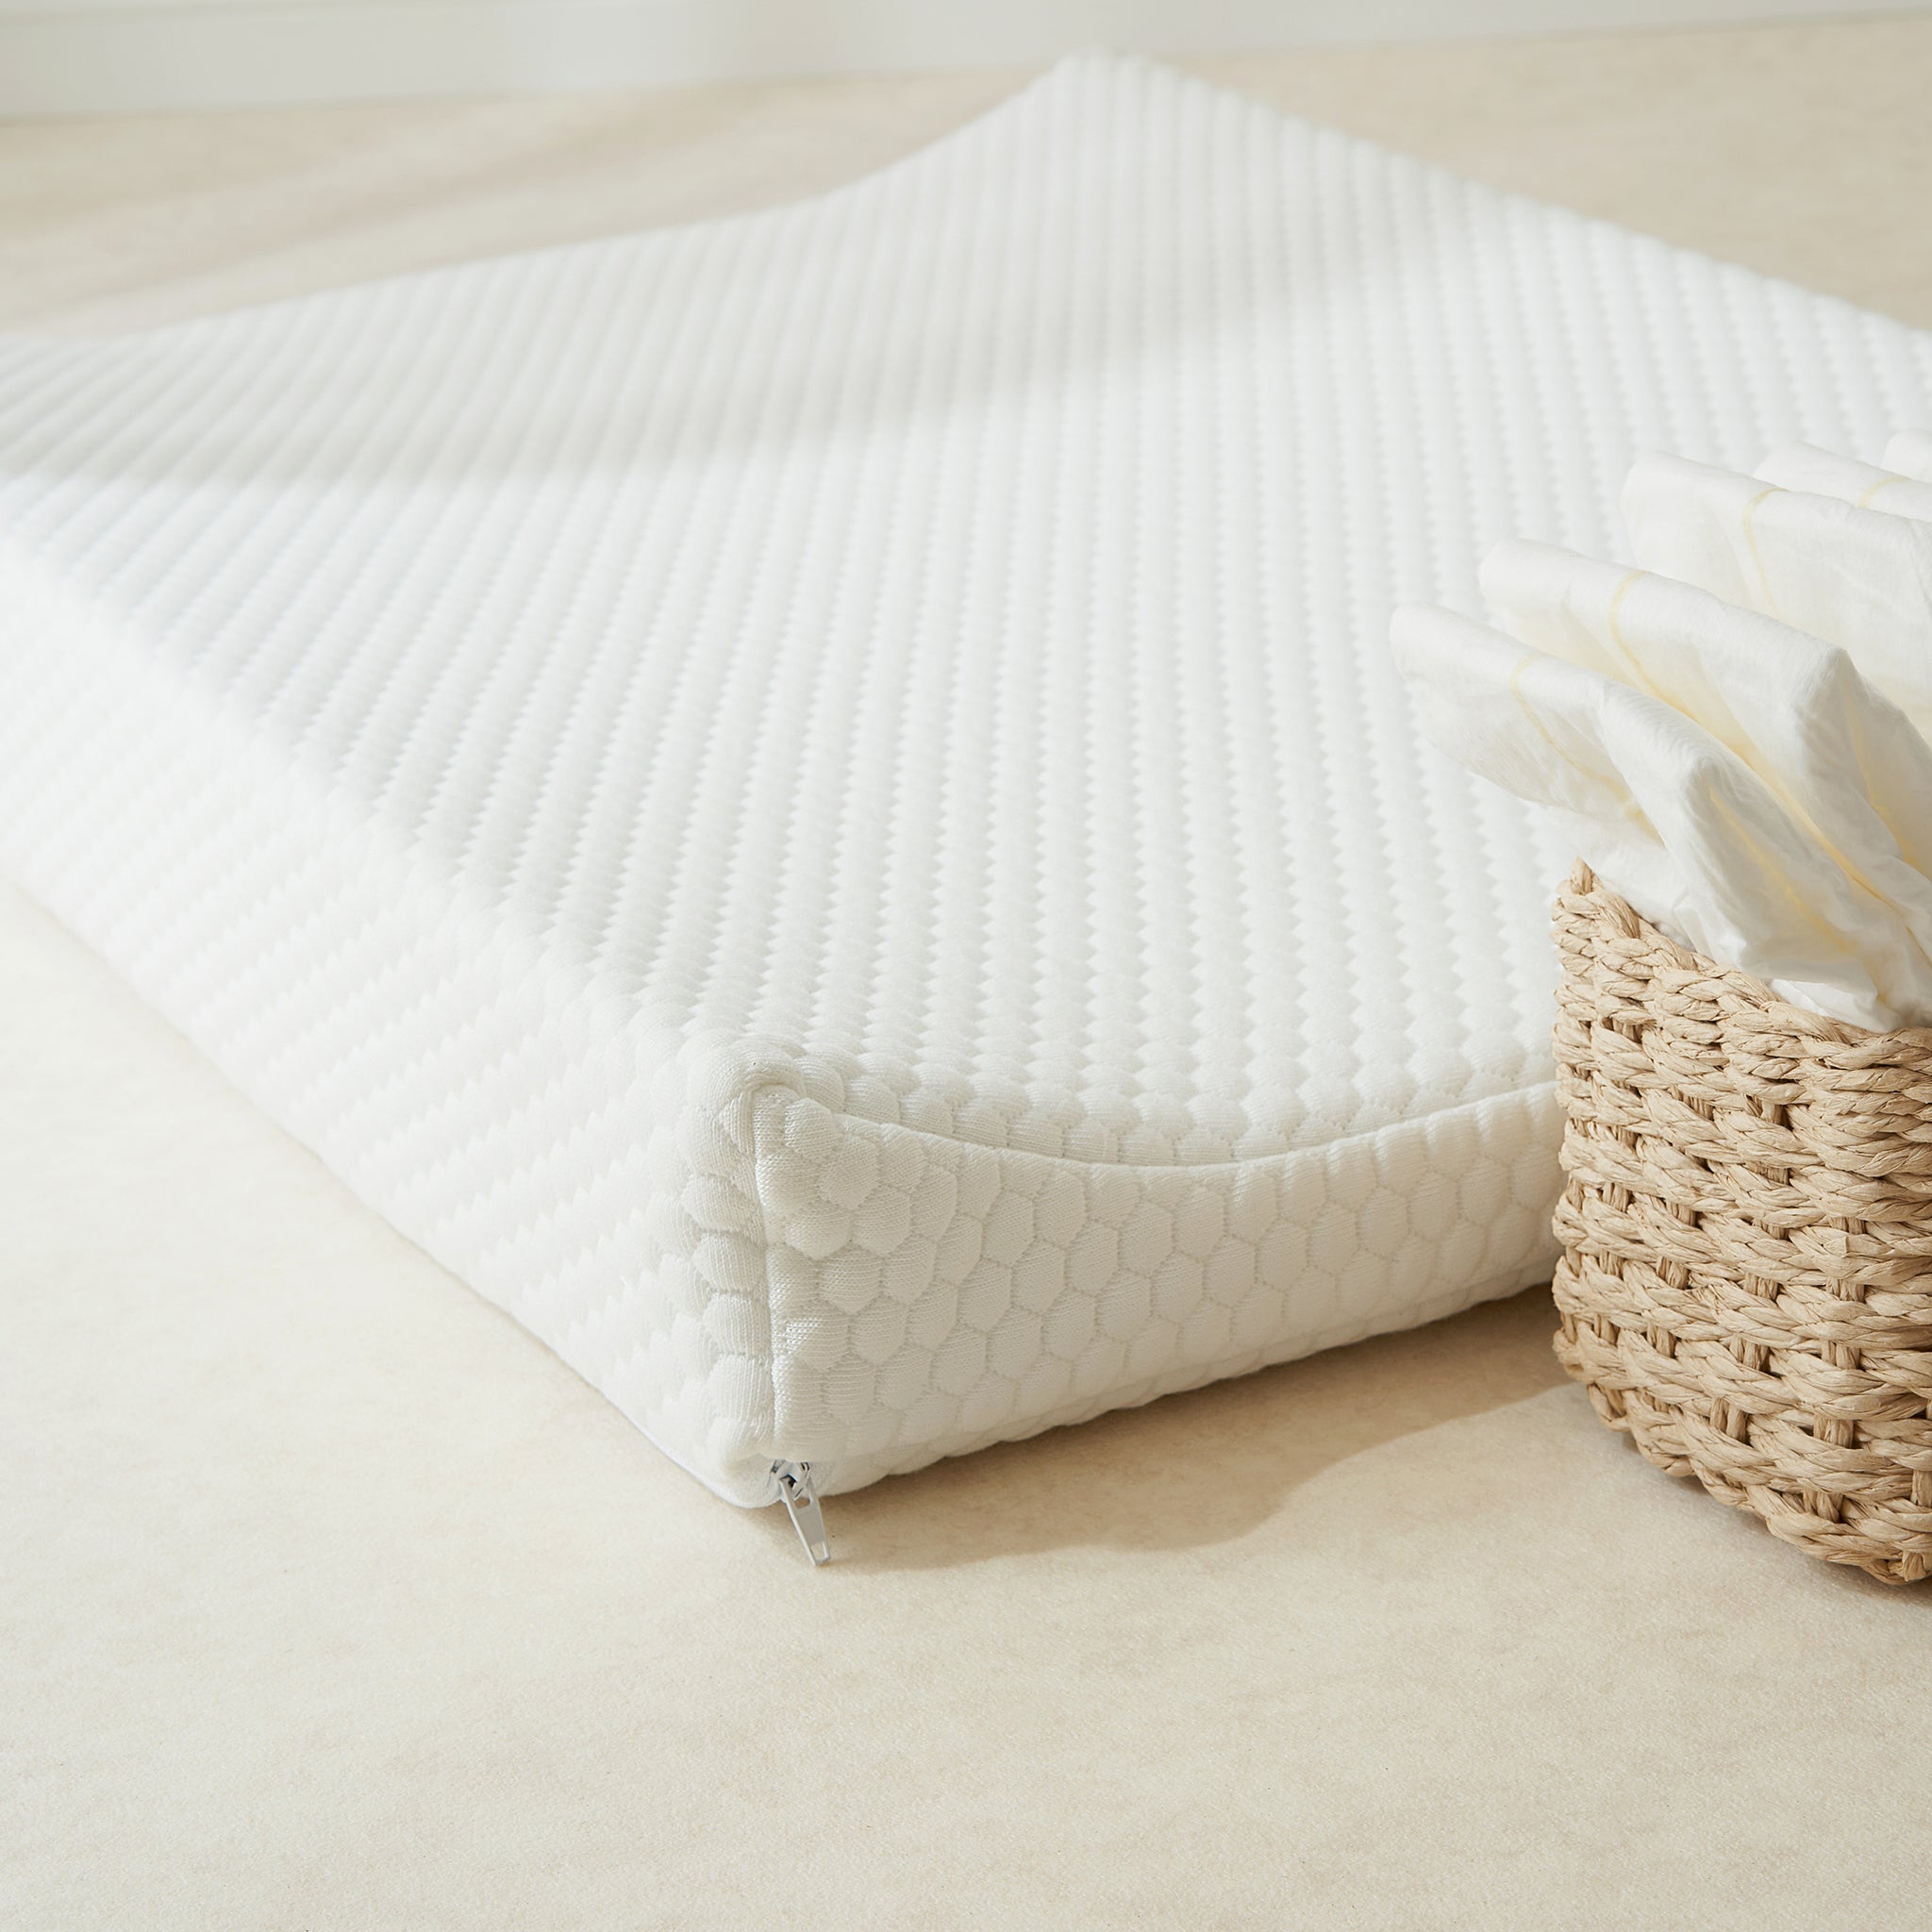 Luxury White Fabric Anti-Roll Changing Mat - The Tiny Bed Company™